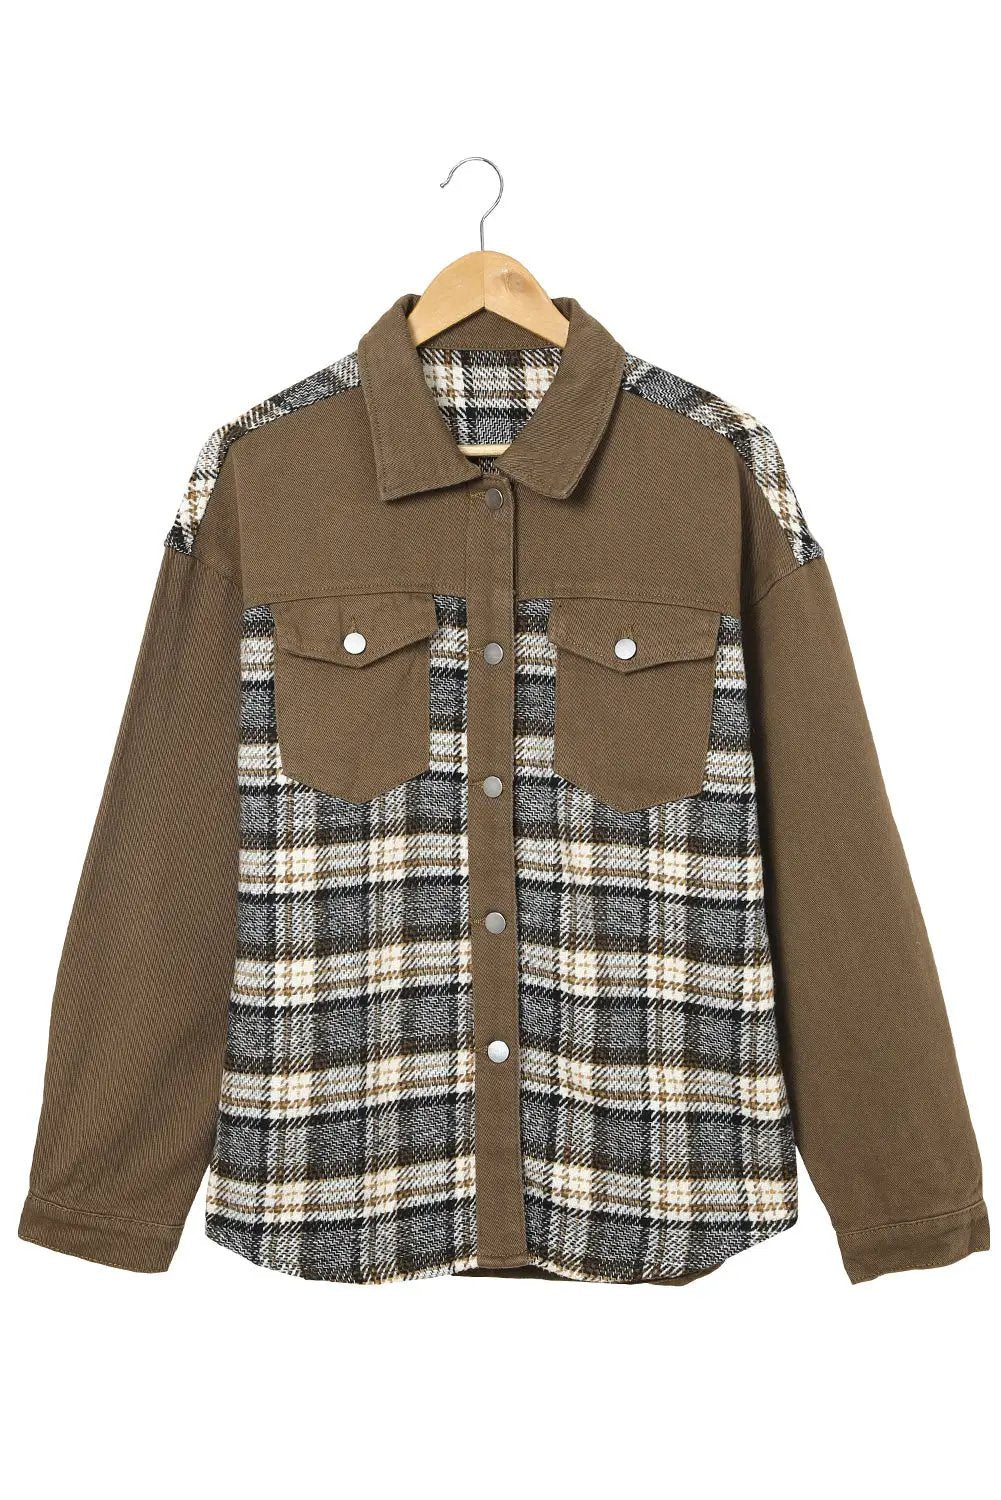 a brown jacket with a plaid pattern on it